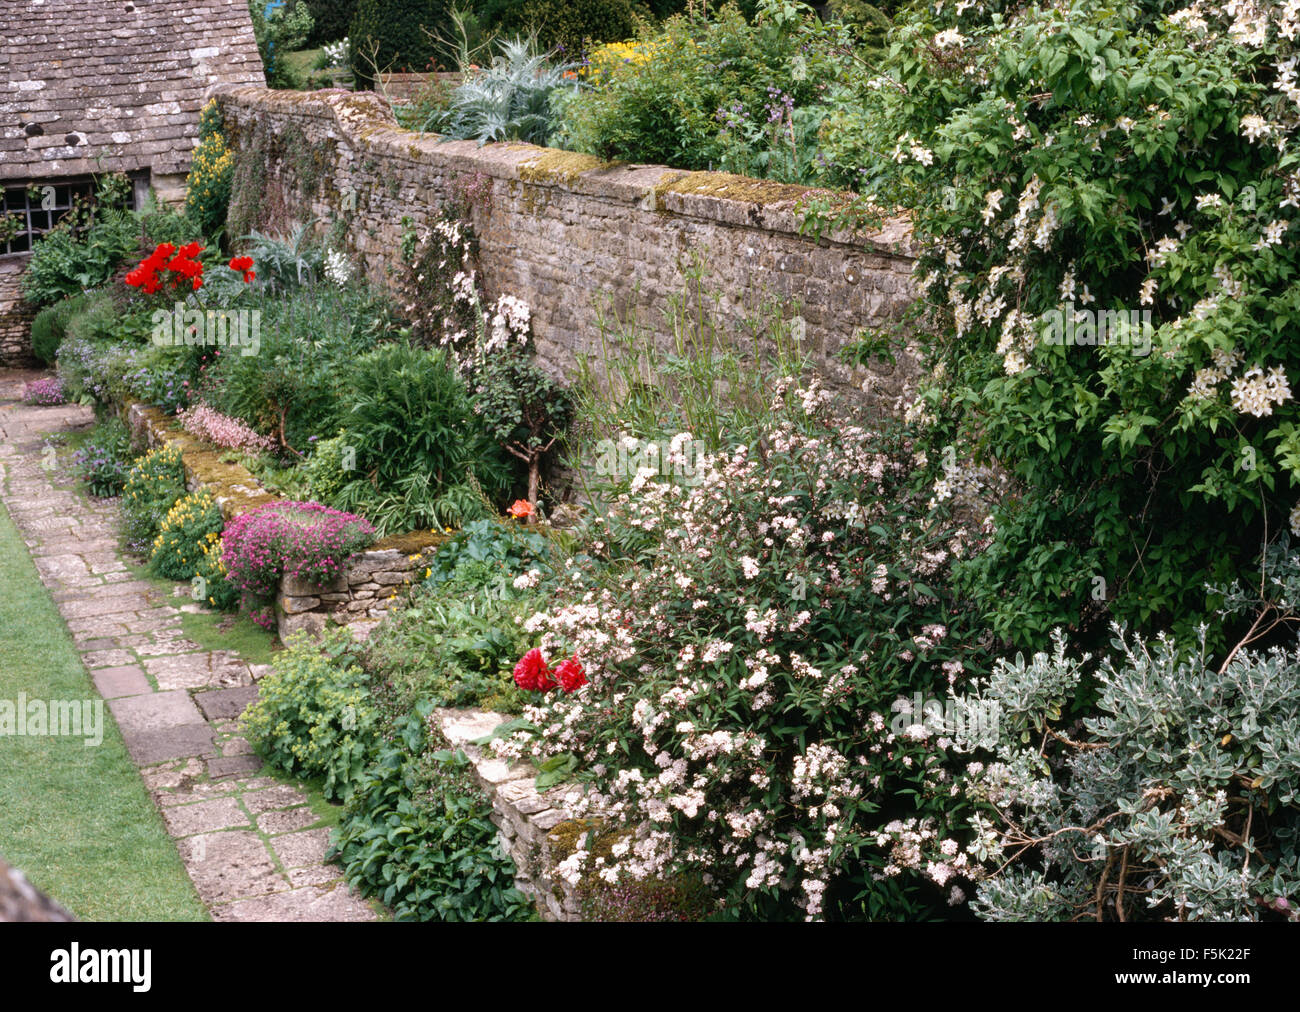 Border planted with perennials and flowering shrubs in walled garden with a narrow paved path Stock Photo